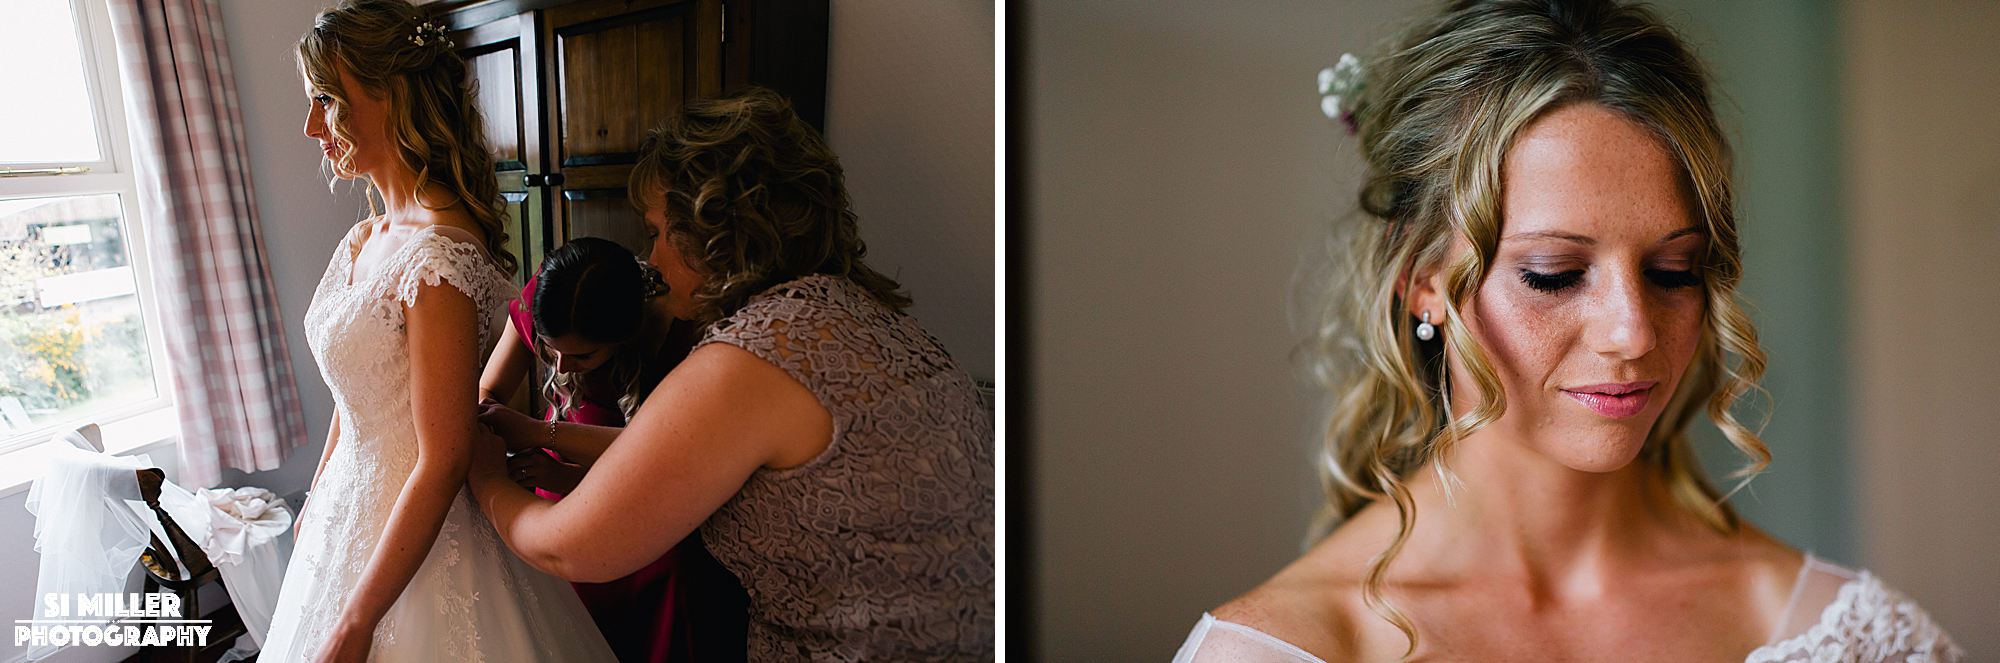 bride getting fastened into her wedding dress by mother 